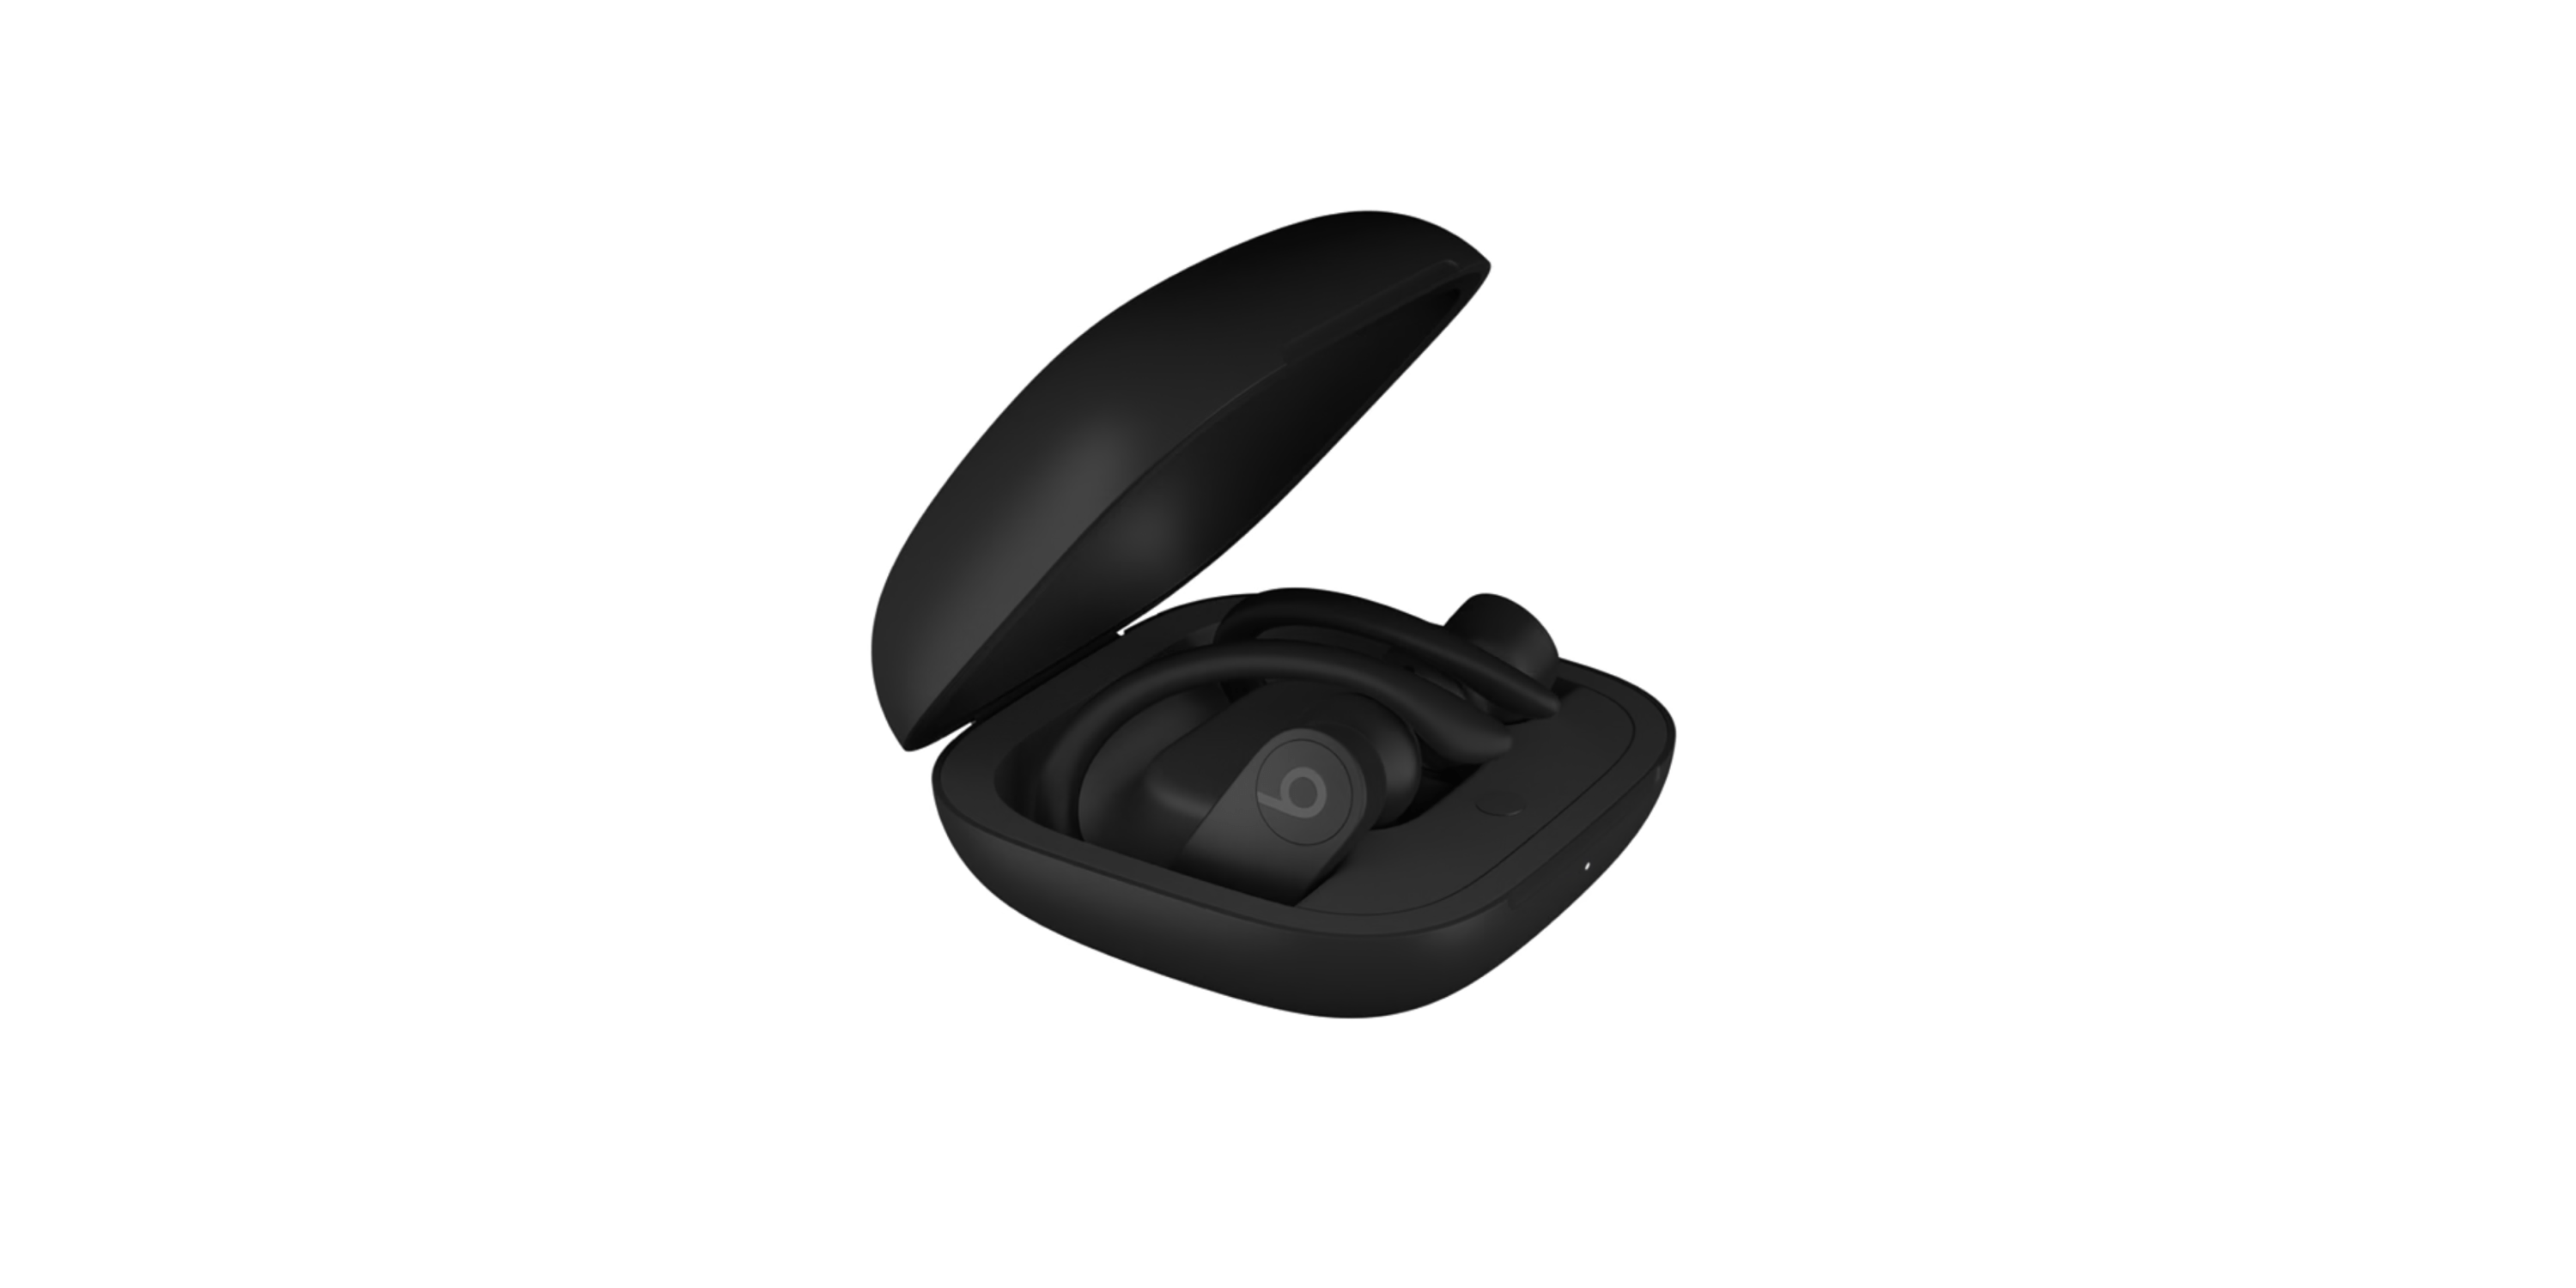 Powerbeats Pro Set to Launch in May - Black Available First, Other Colors in the Summer